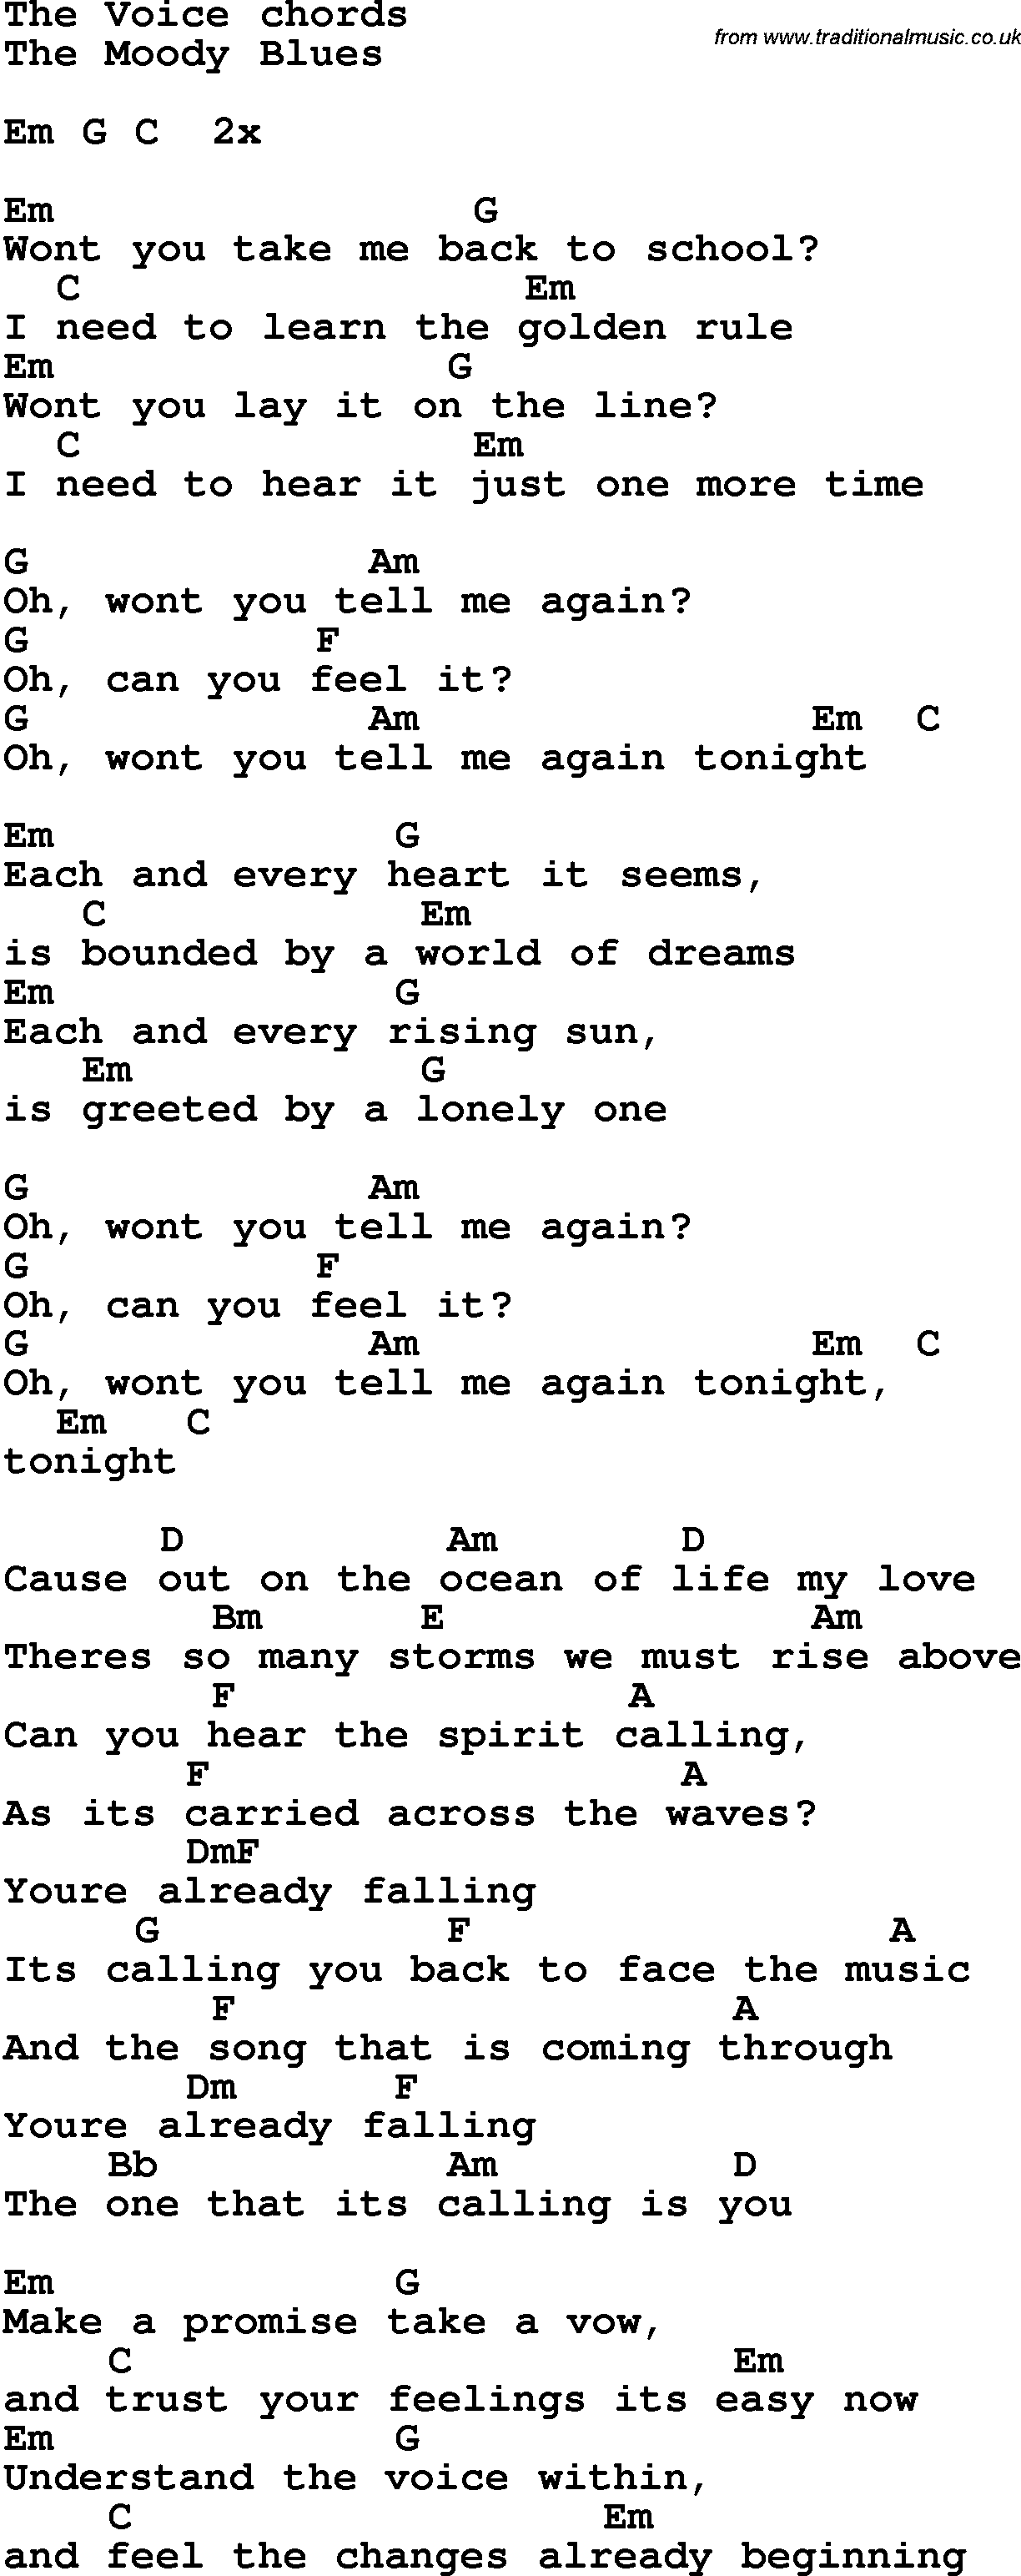 Song Lyrics with guitar chords for The Voice - The Moody Blues